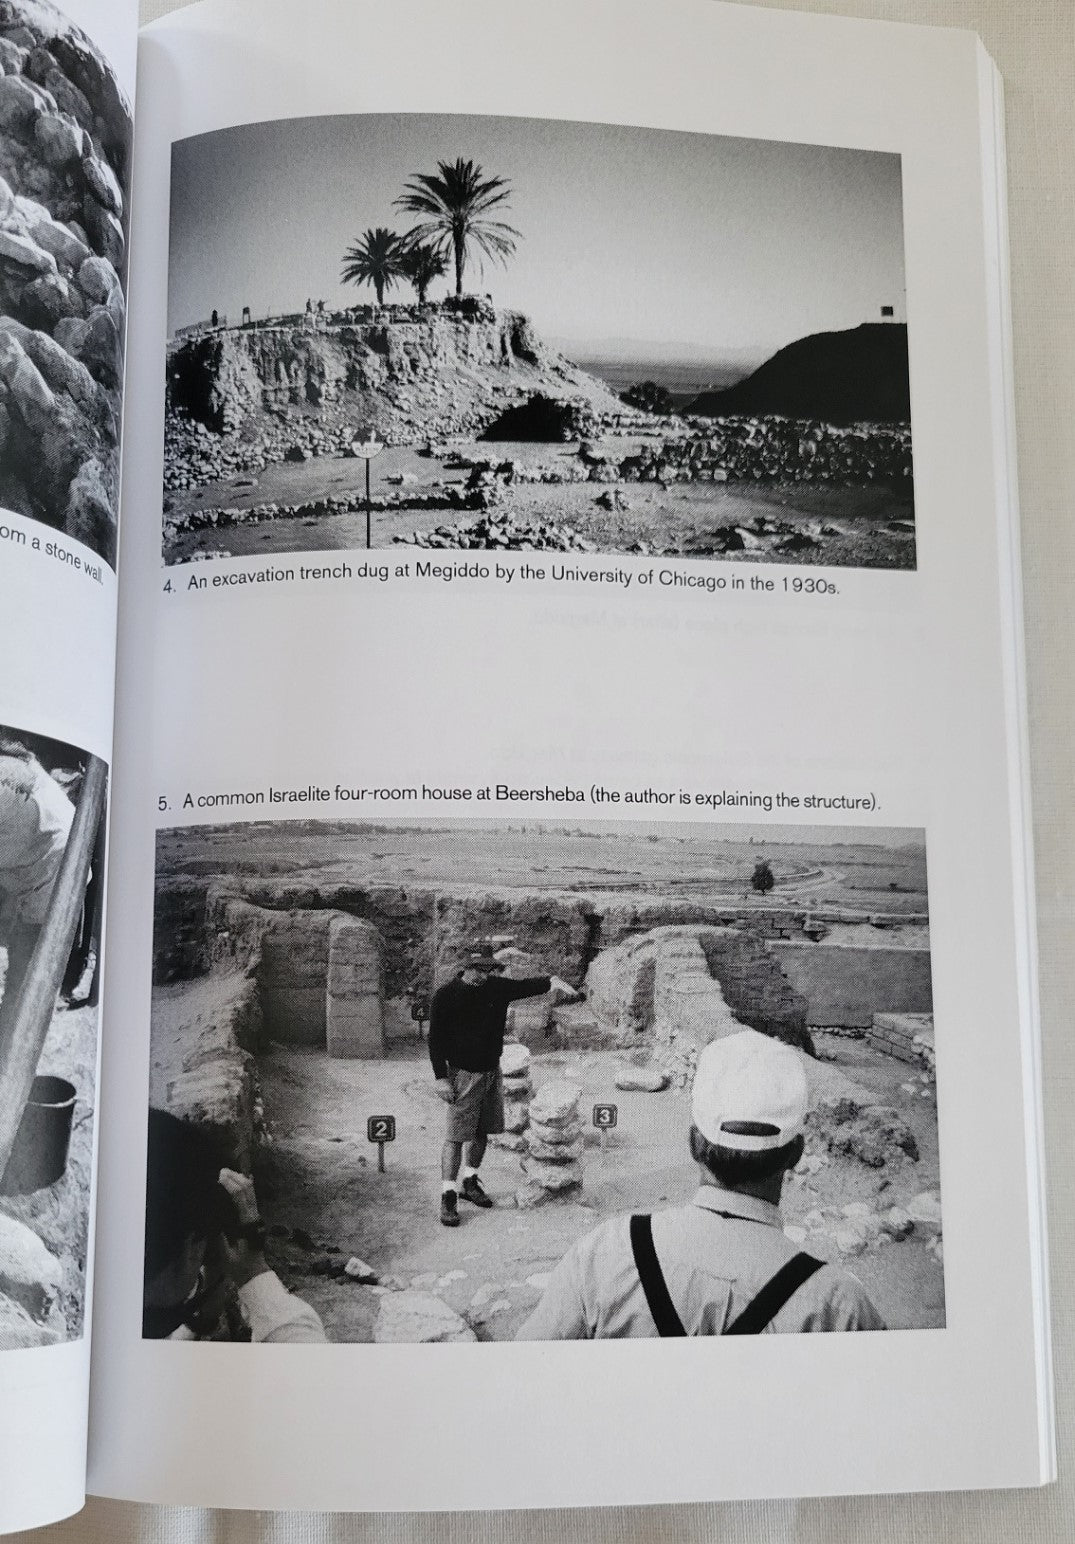 Used book “Doing Archaeology in the Land of the Bible: A Basic Guide” Written by John D. Currid. "A popular introduction to archaeology and the methods archaeologists use to reconstruct the history of ancient Israel." View of interior pictures.